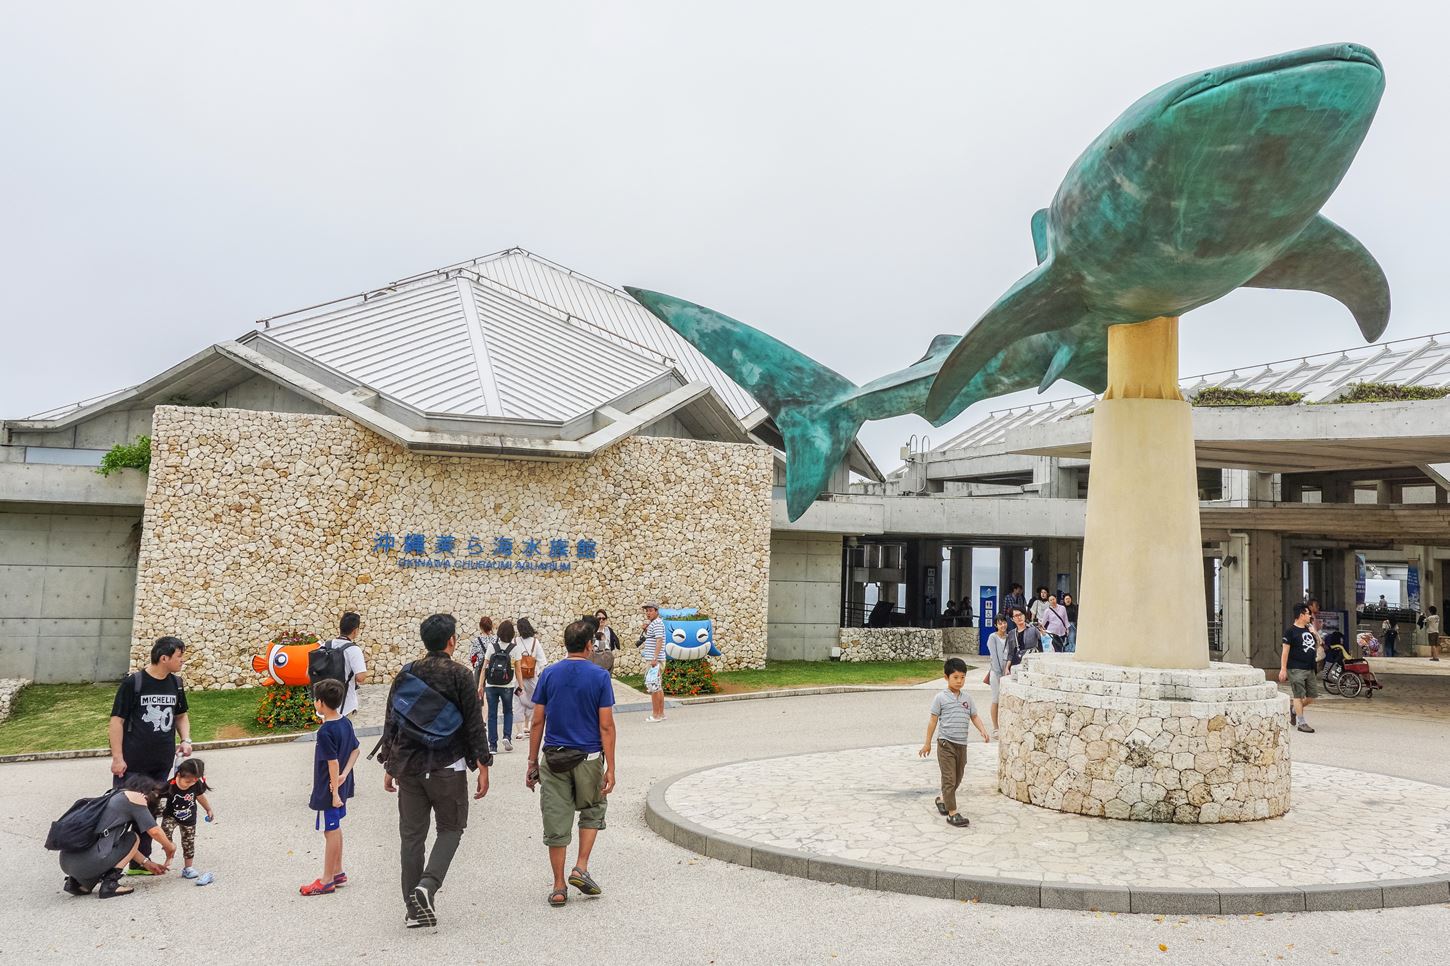 Sightseeing scenery that simply shows the weather and clothes in Okinawa in April3